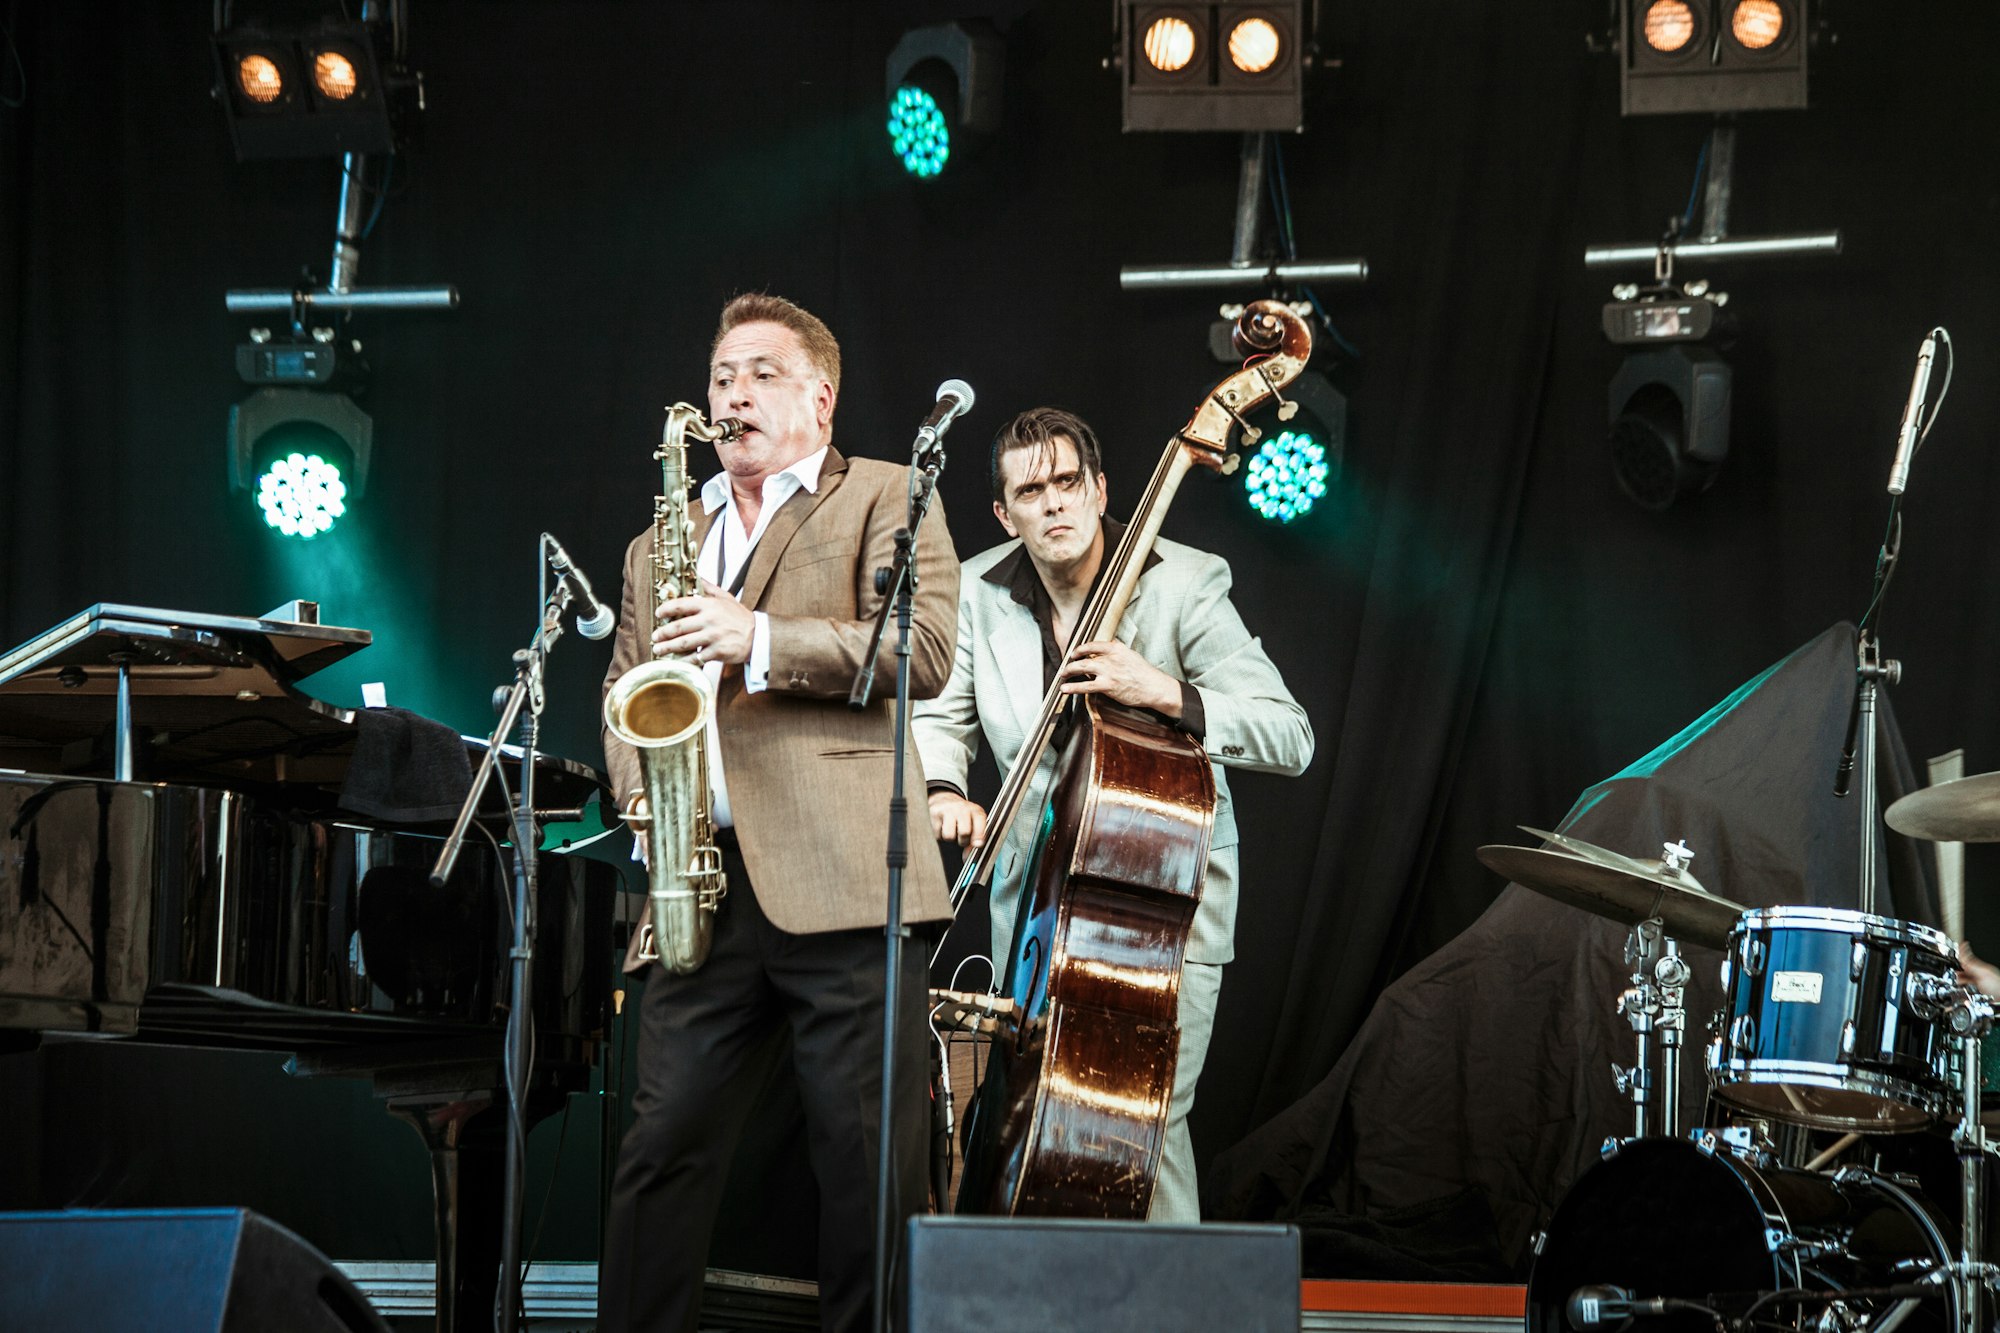 The bass player and the saxophonist of a jazz band perform during a concert.